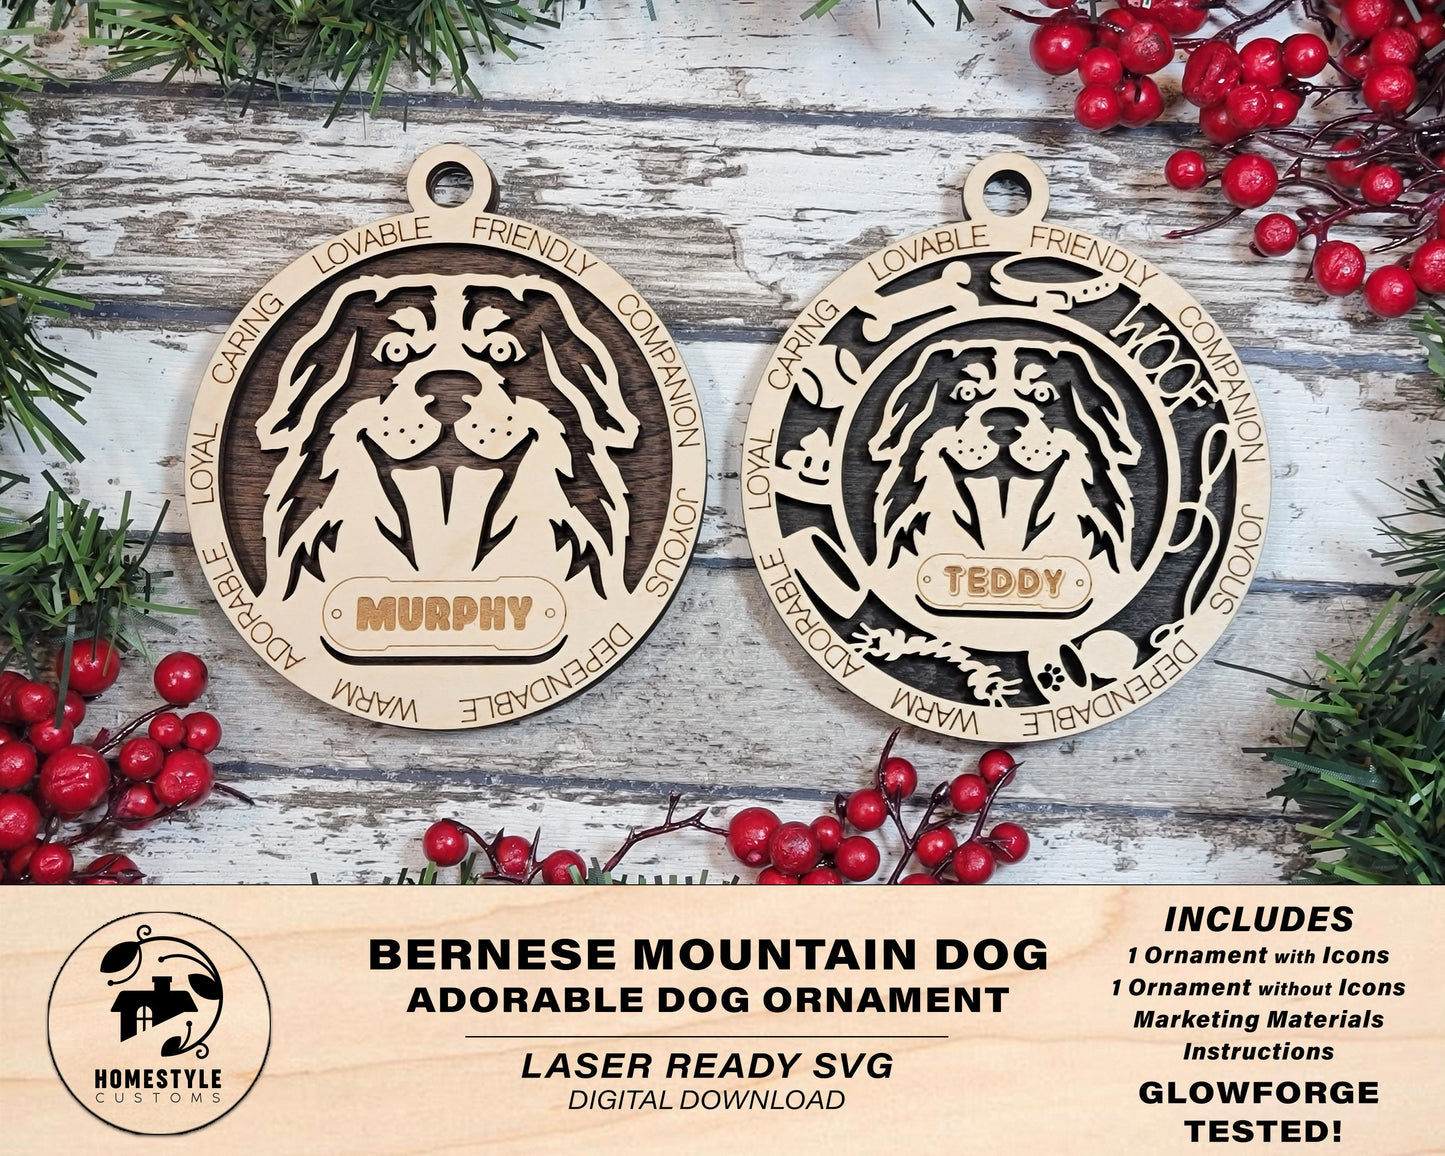 Bernese Mountain Dog - Adorable Dog Ornaments - 2 Ornaments included - SVG, PDF, AI File Download - Sized for Glowforge